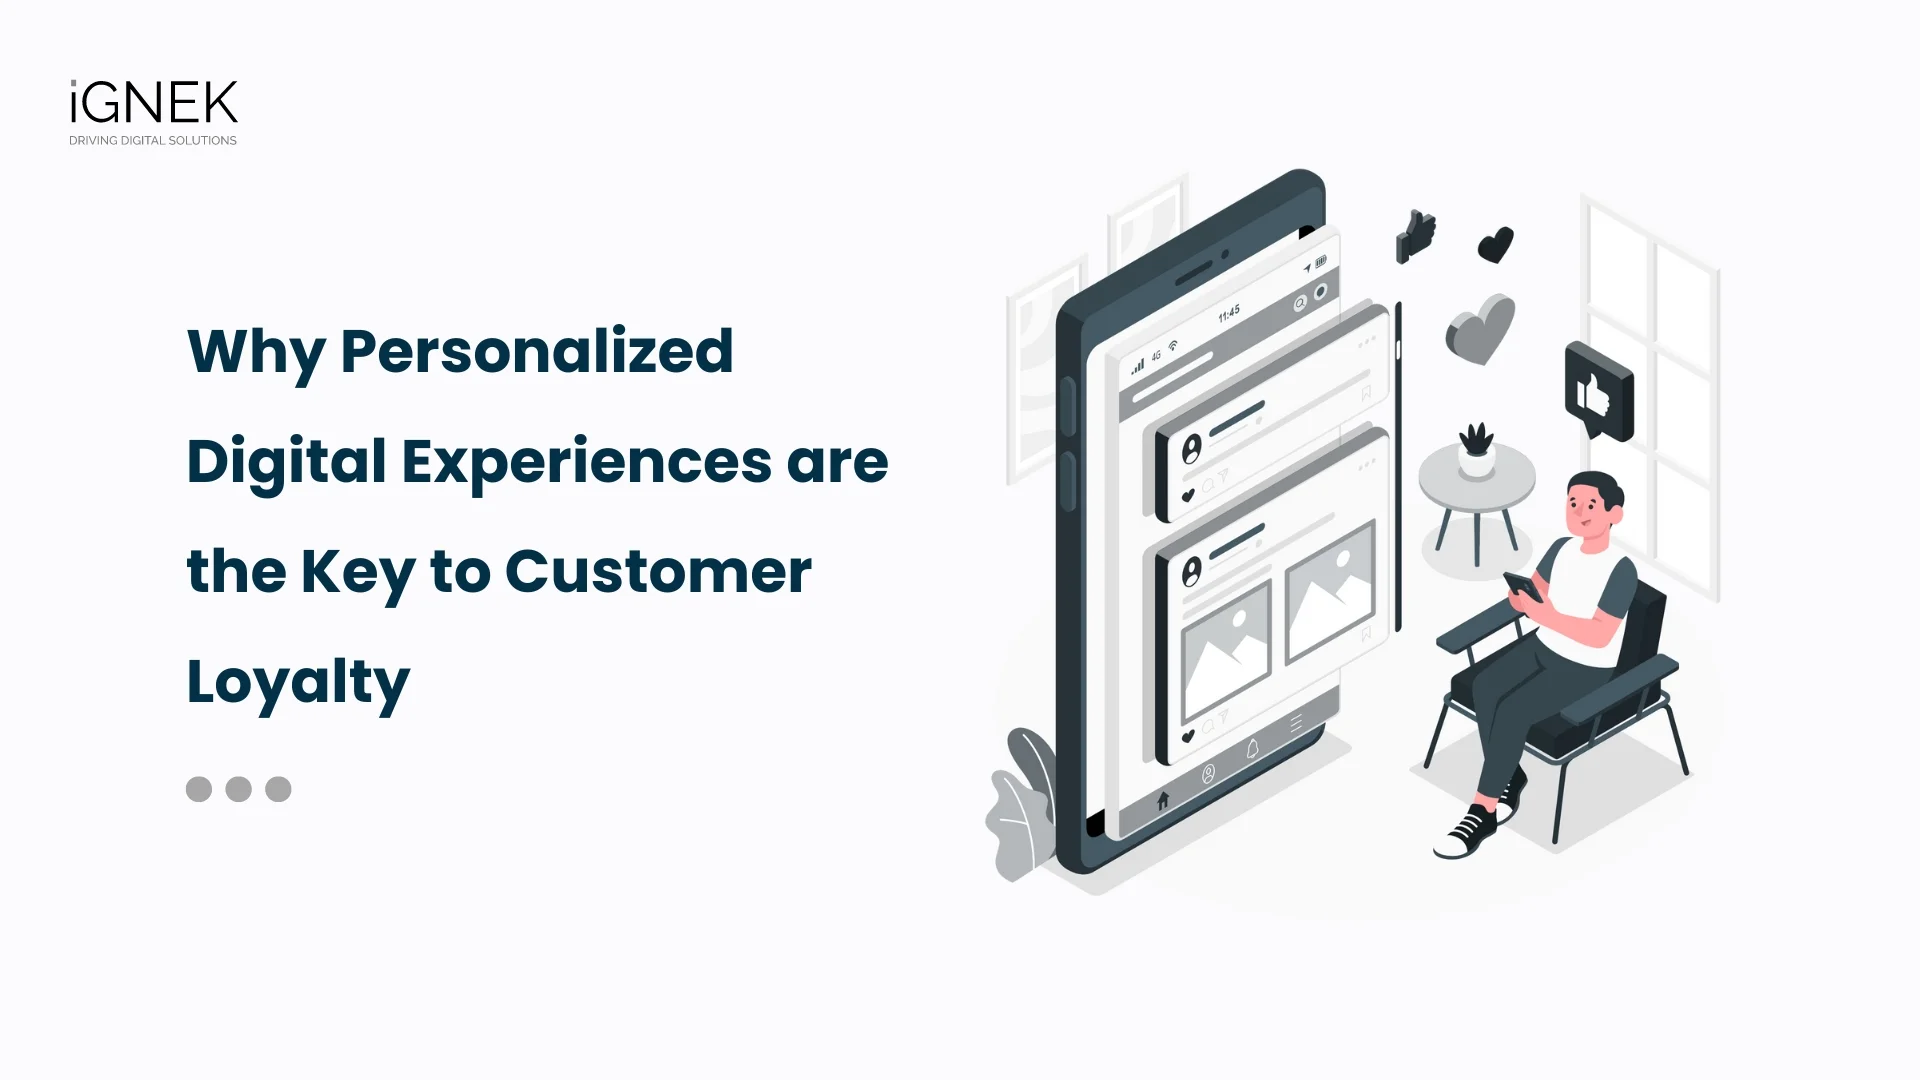 Why Personalized Digital Experiences are the Key to Customer Loyalty